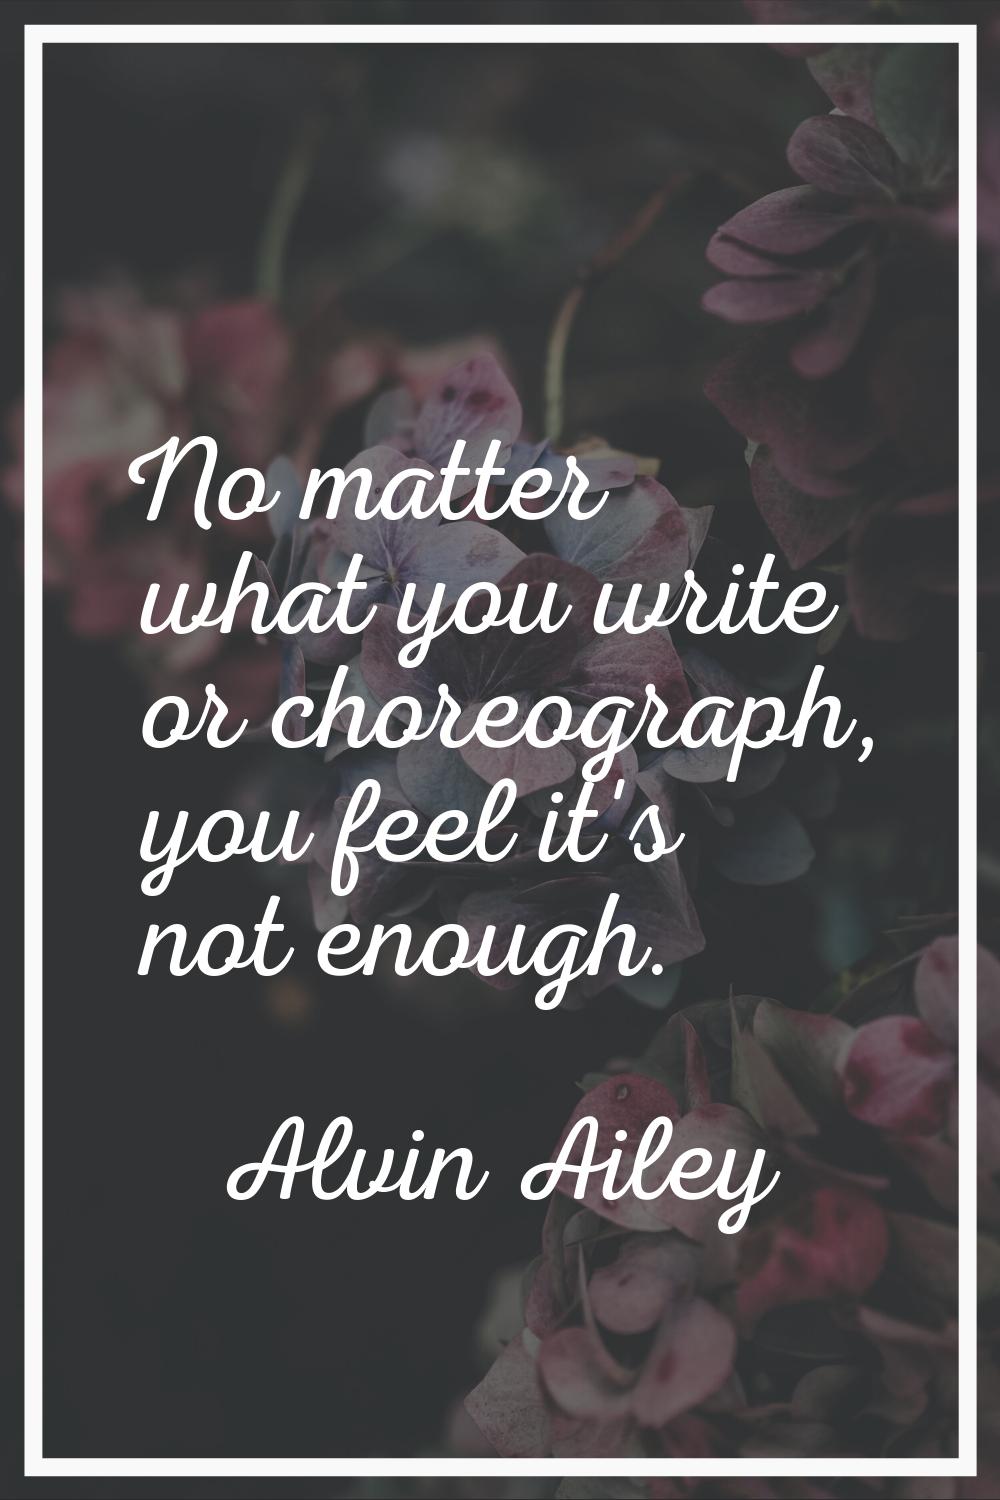 No matter what you write or choreograph, you feel it's not enough.